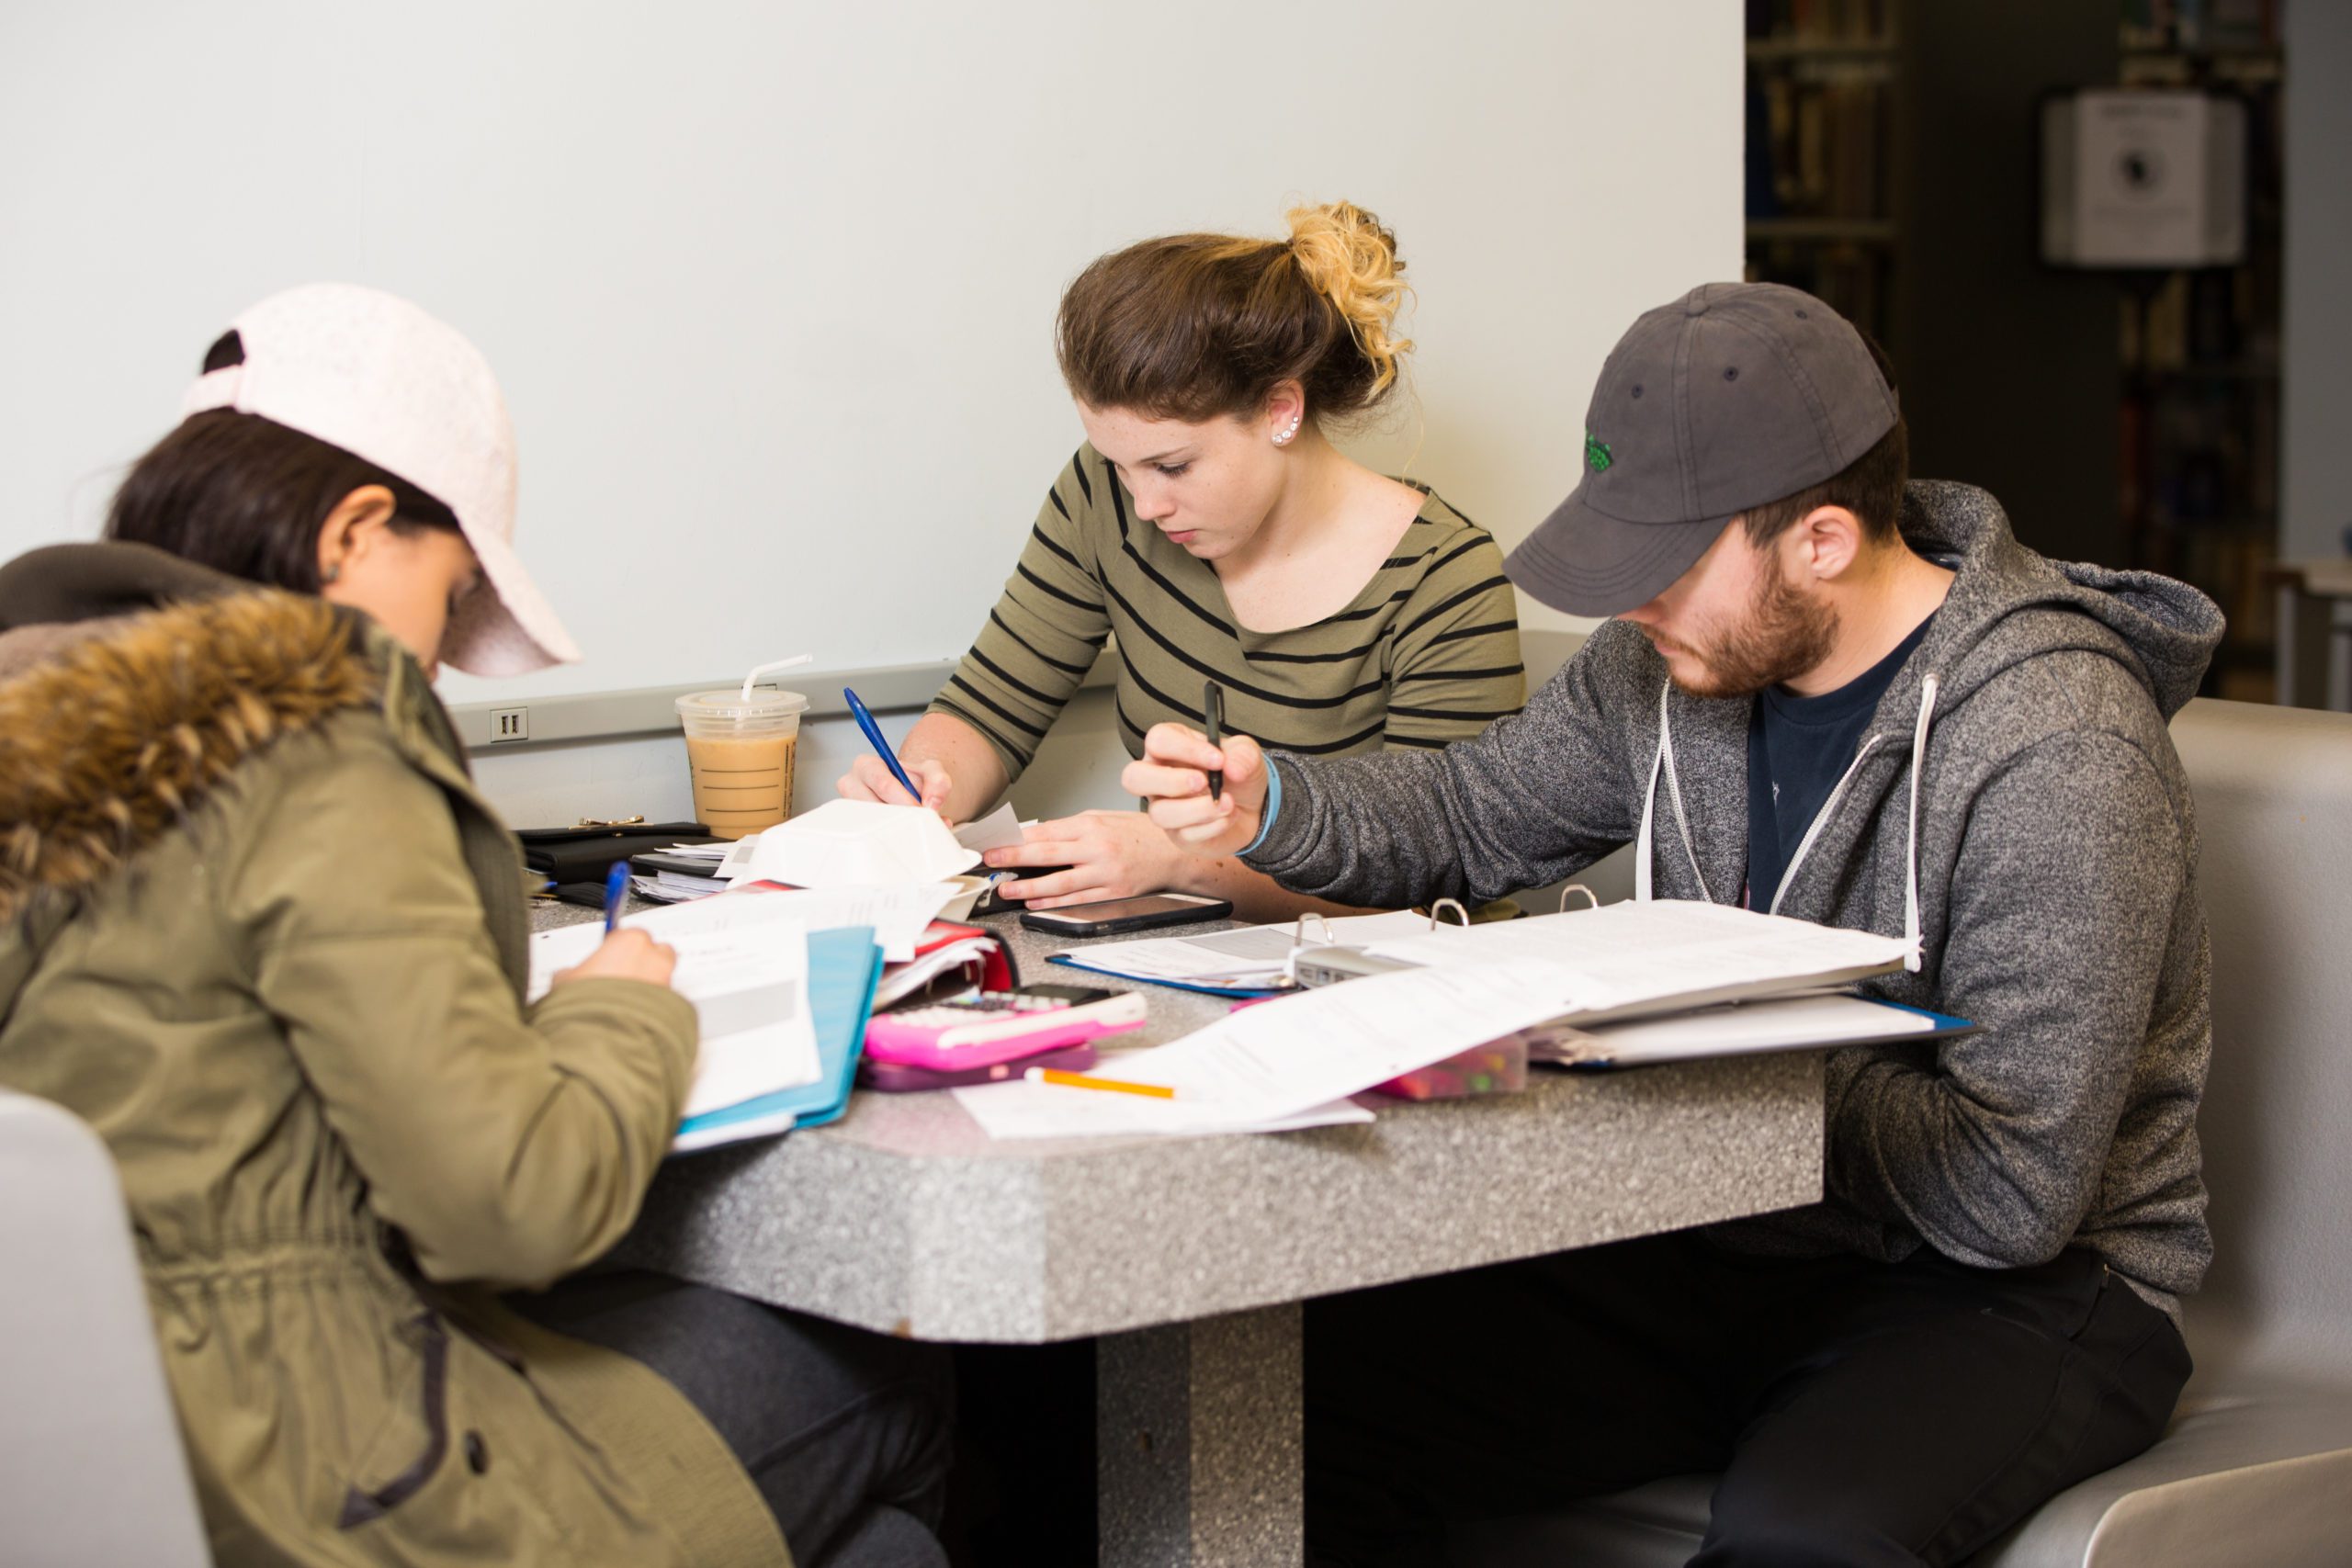 Students sitting at a table and studying in the library.